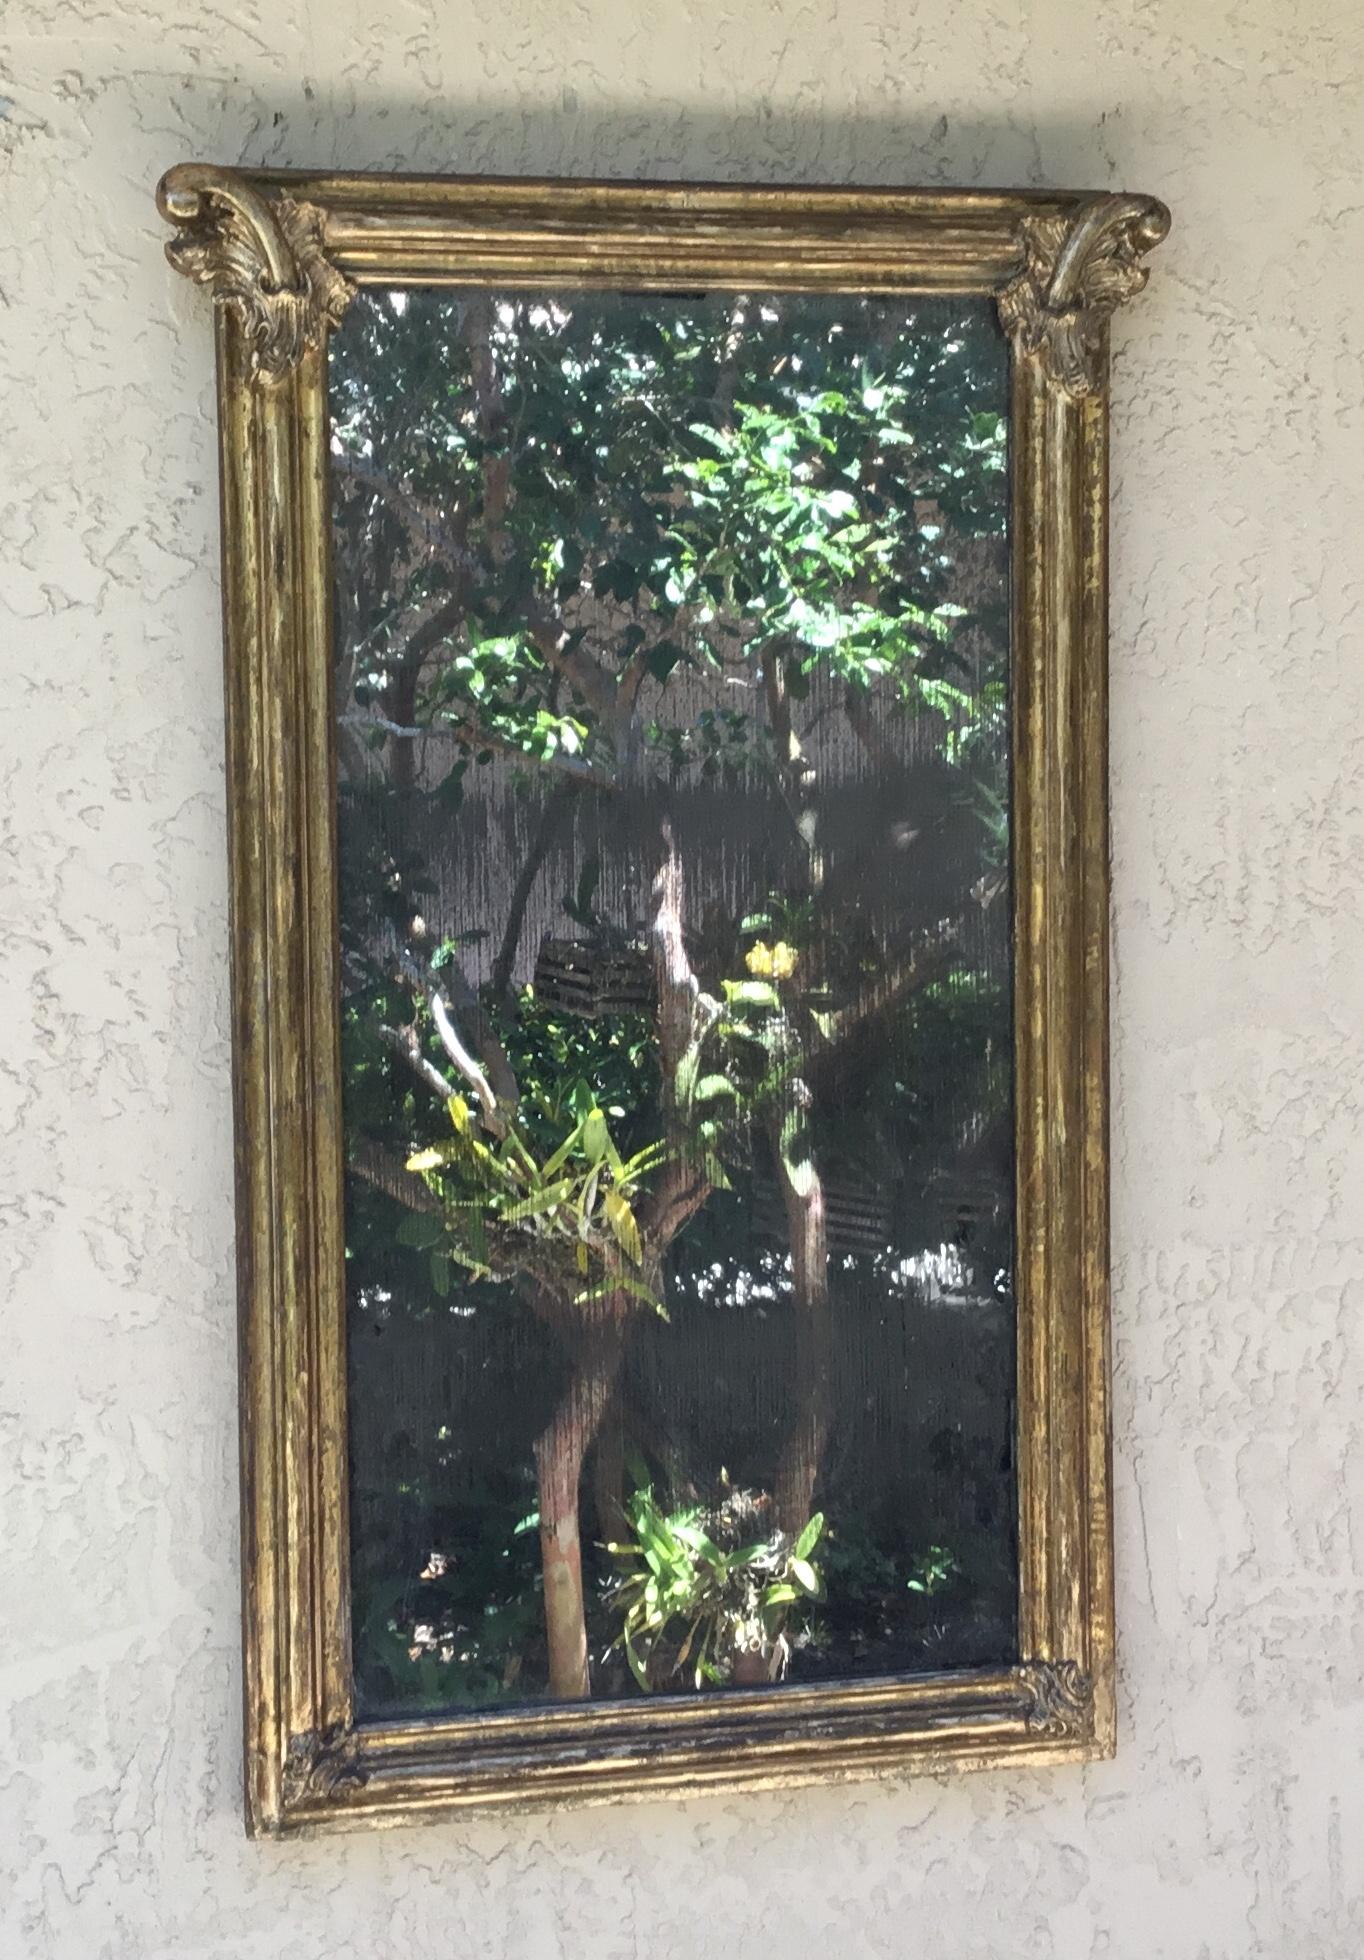 Elegant antique mirror made of wood, straight line, decorative molding on each corner, originally
Gold leaf although due the age and time some of it undergone some restoration. The mirror plate itself is original and mercury silvered distress with